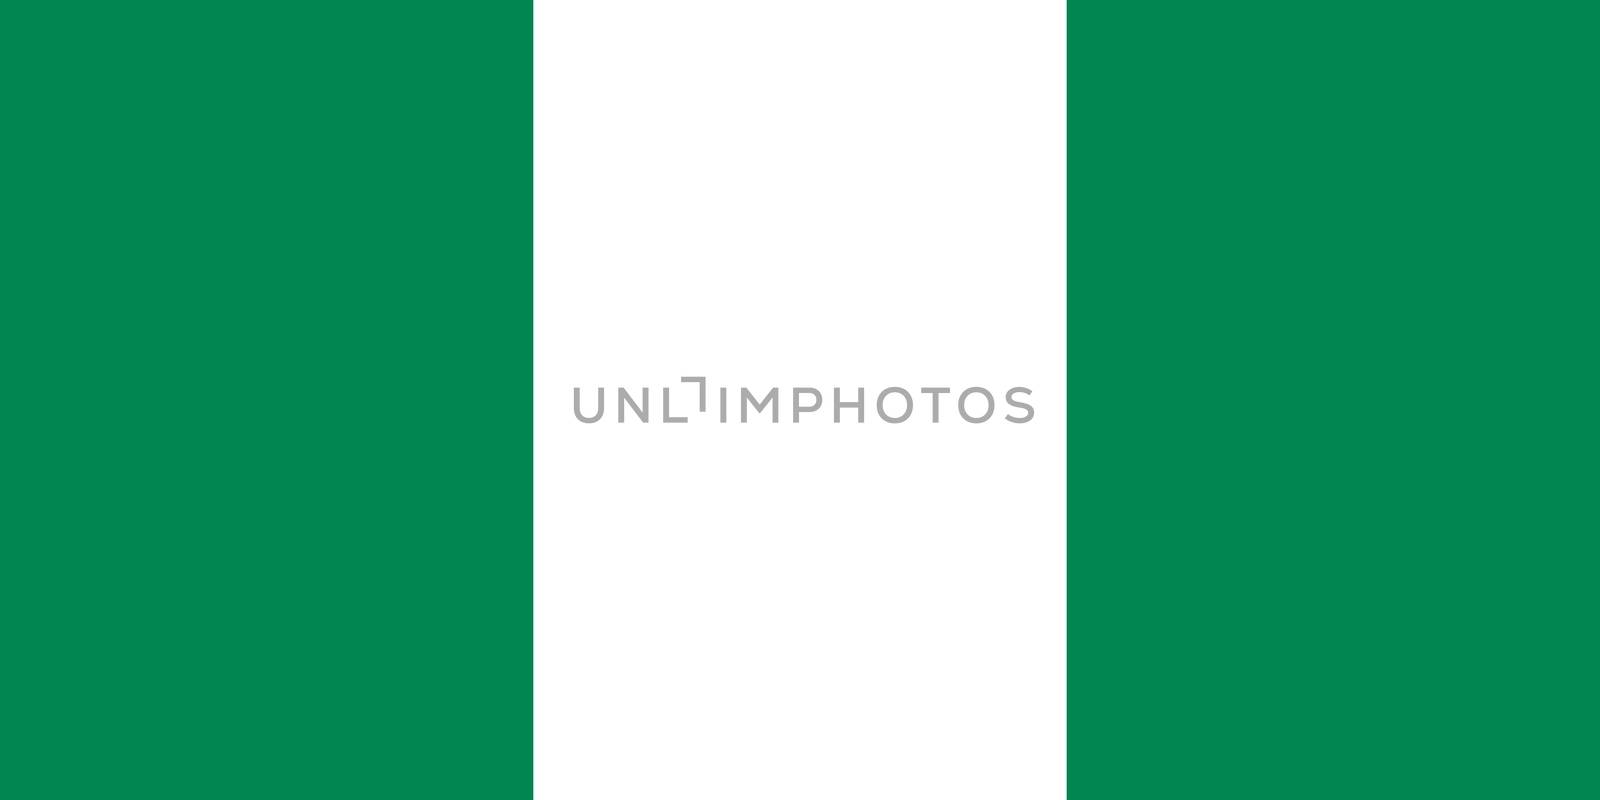 The national flag of Nigeria